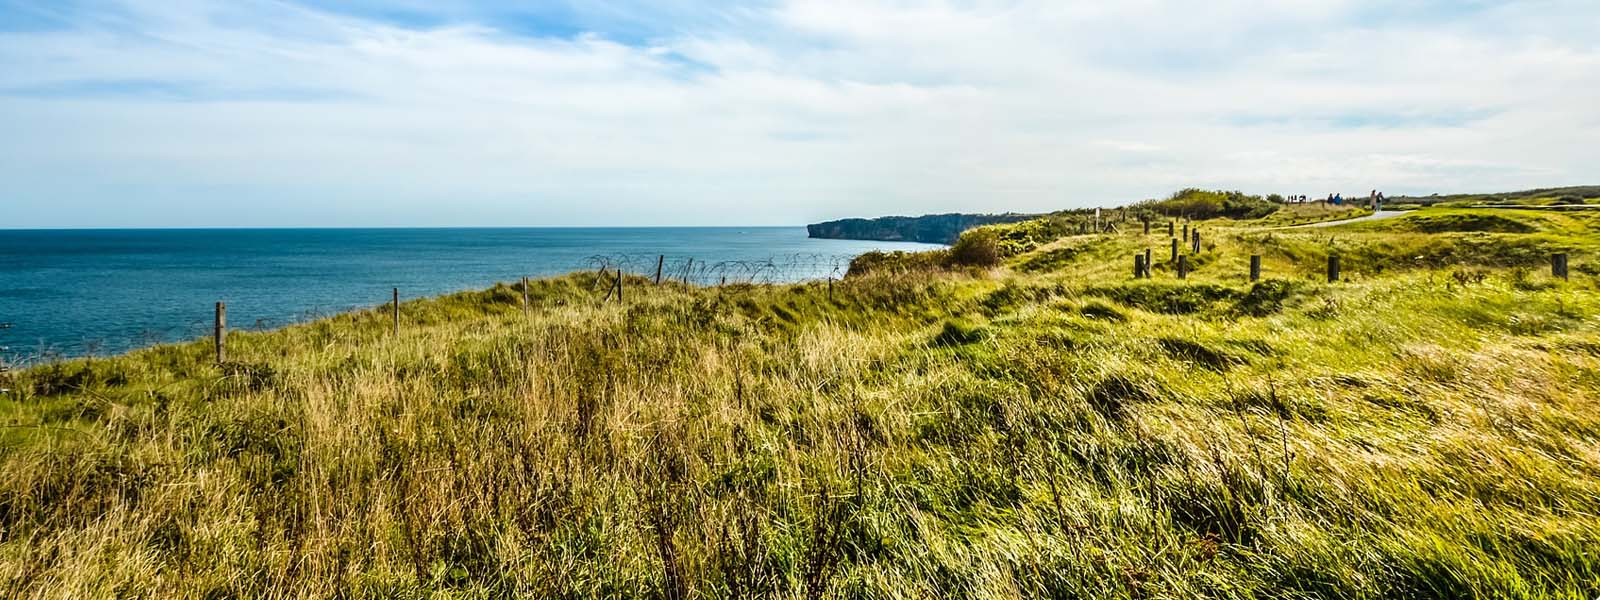 A coastline with grass and cliffs